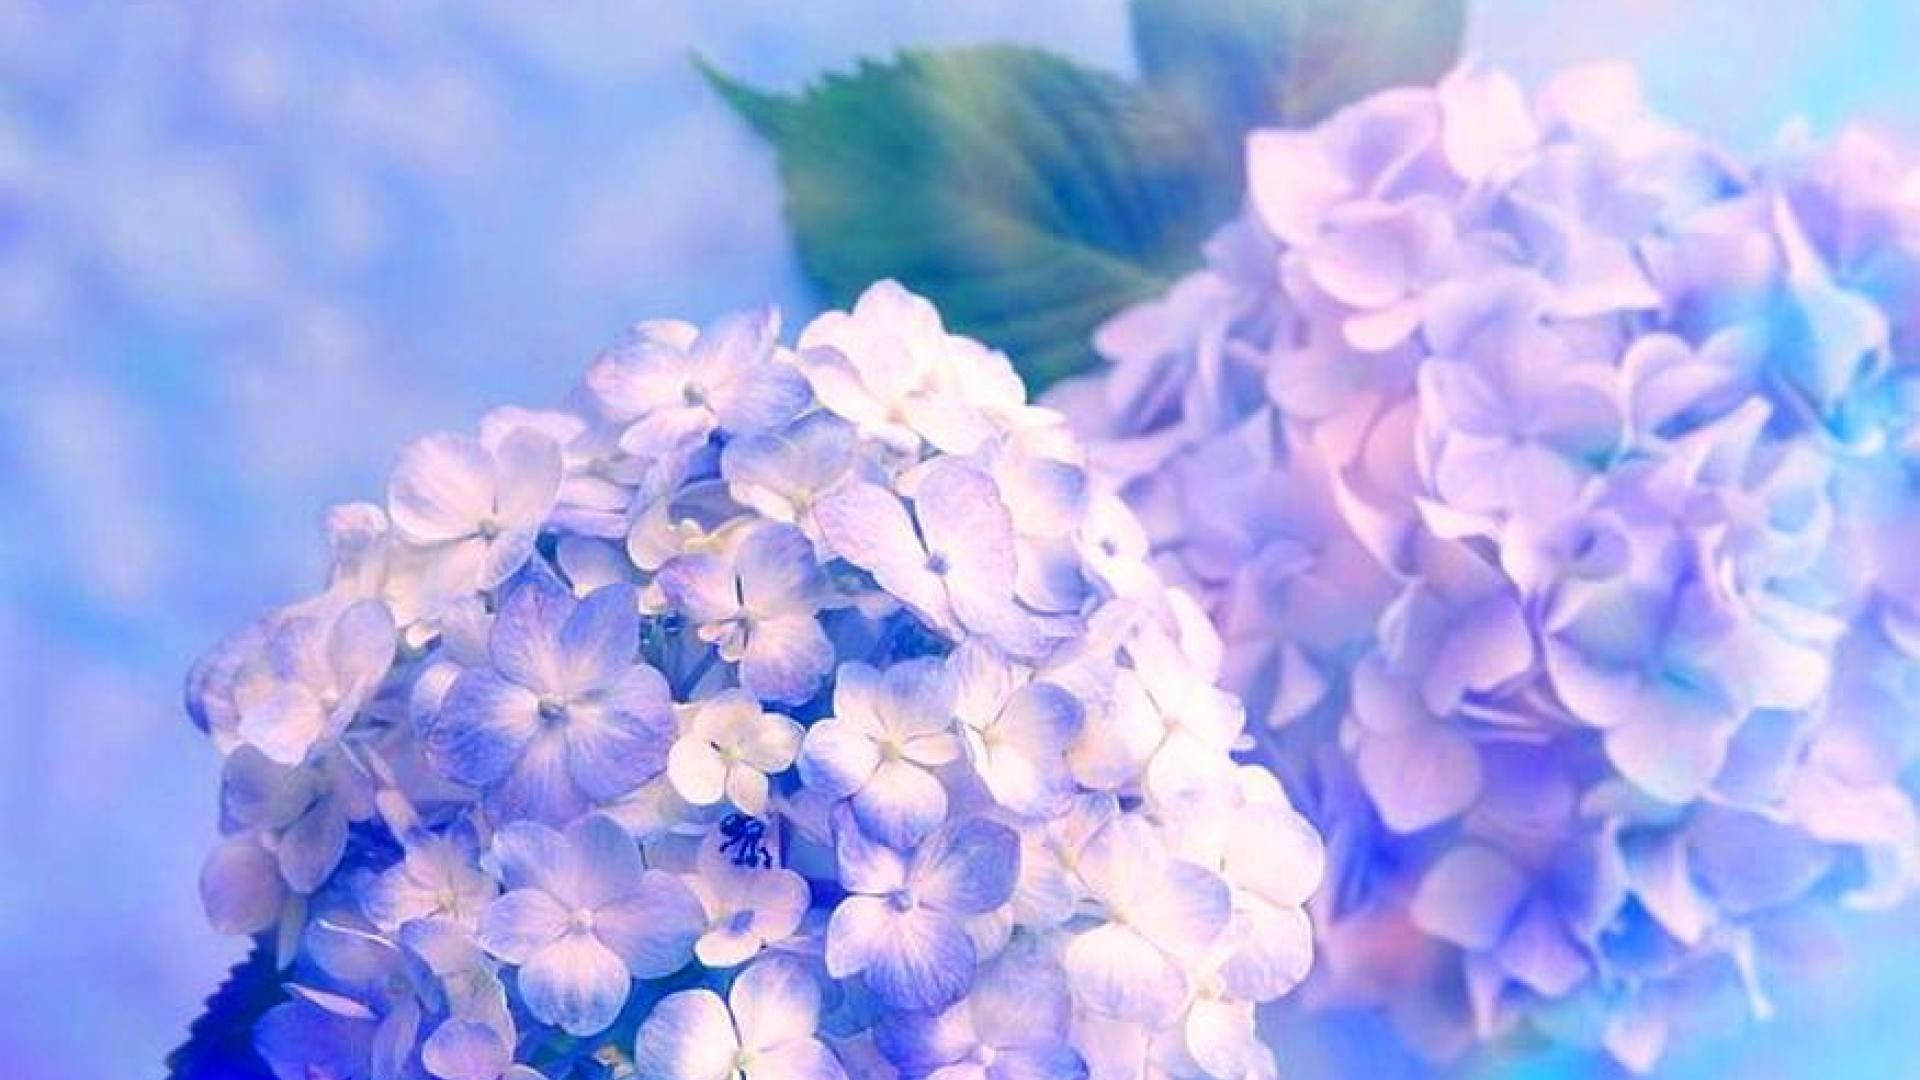 Blue Hydrangea Flower Hd Wallpaper Background Blue Hydrangea Flower Hd  Photography Photo Background Image And Wallpaper for Free Download